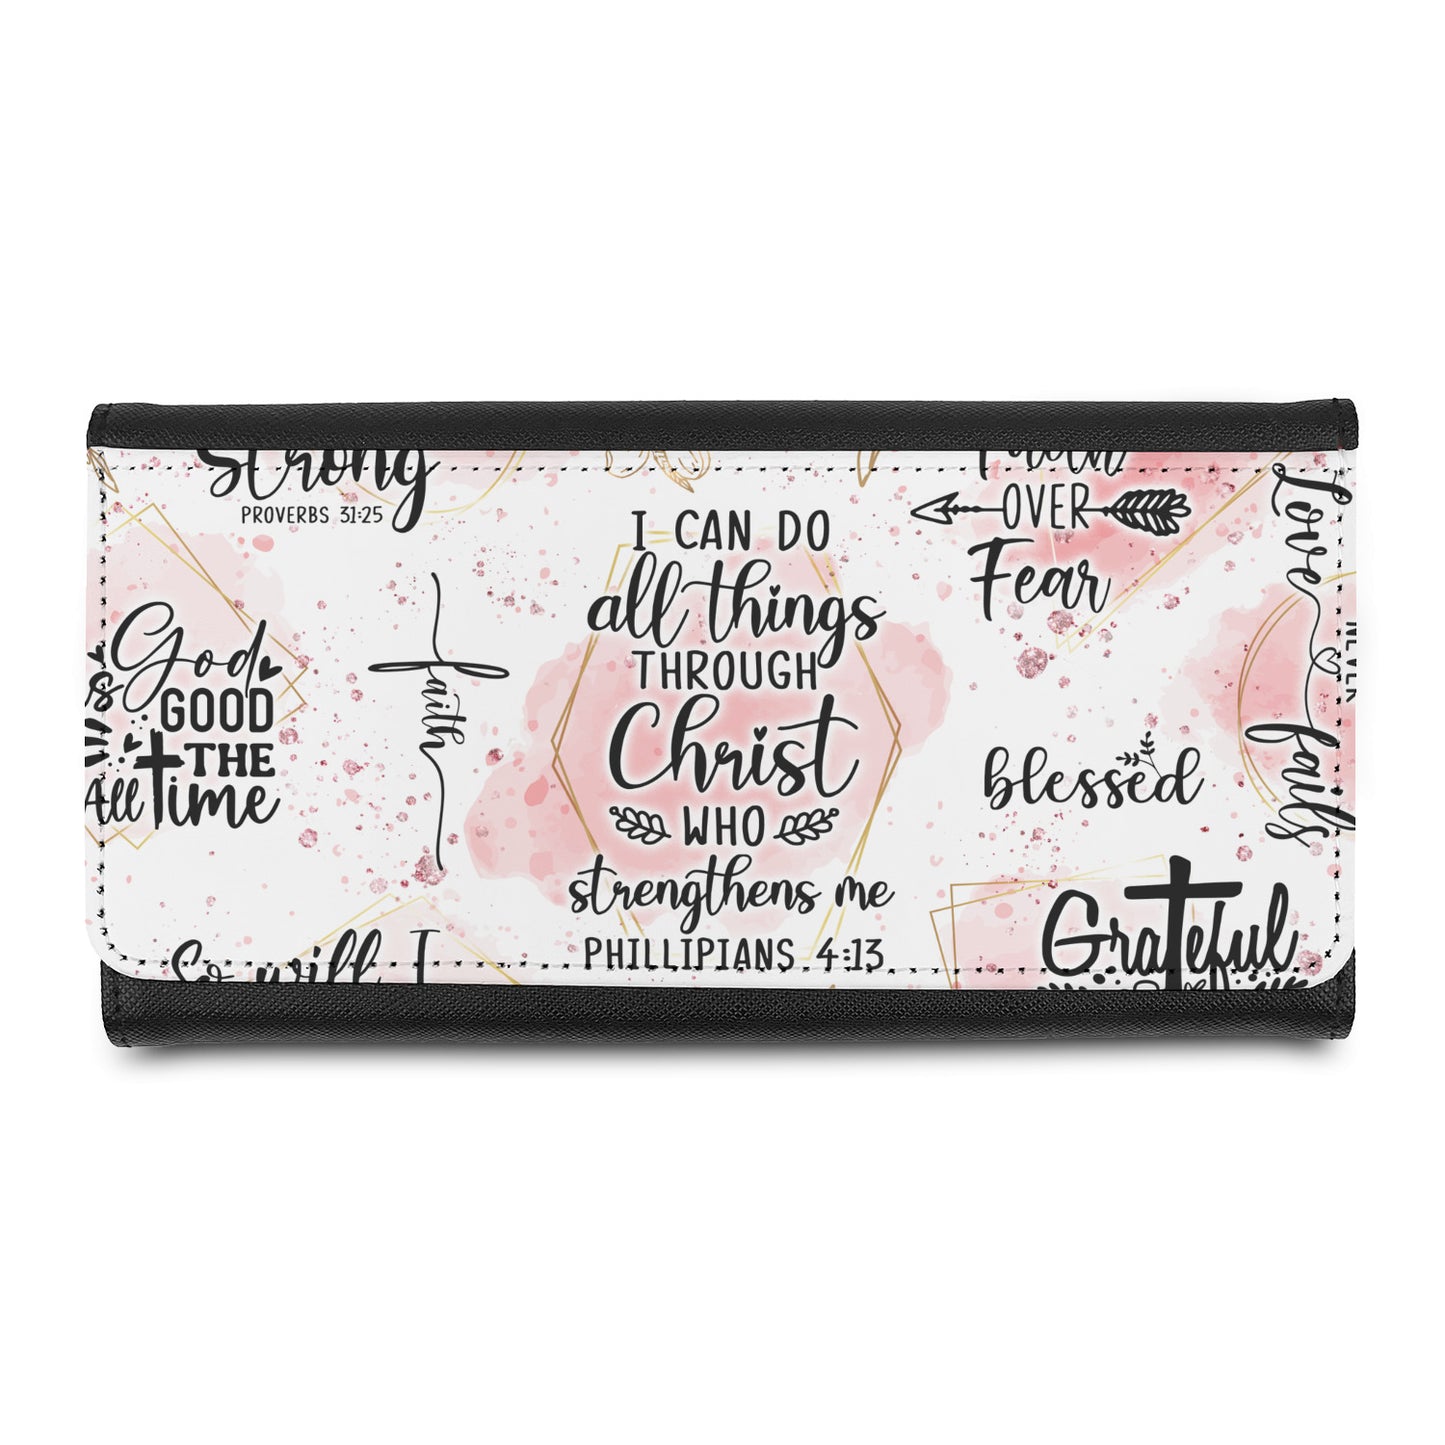 Christian Inspiration Quotes Design Wallet